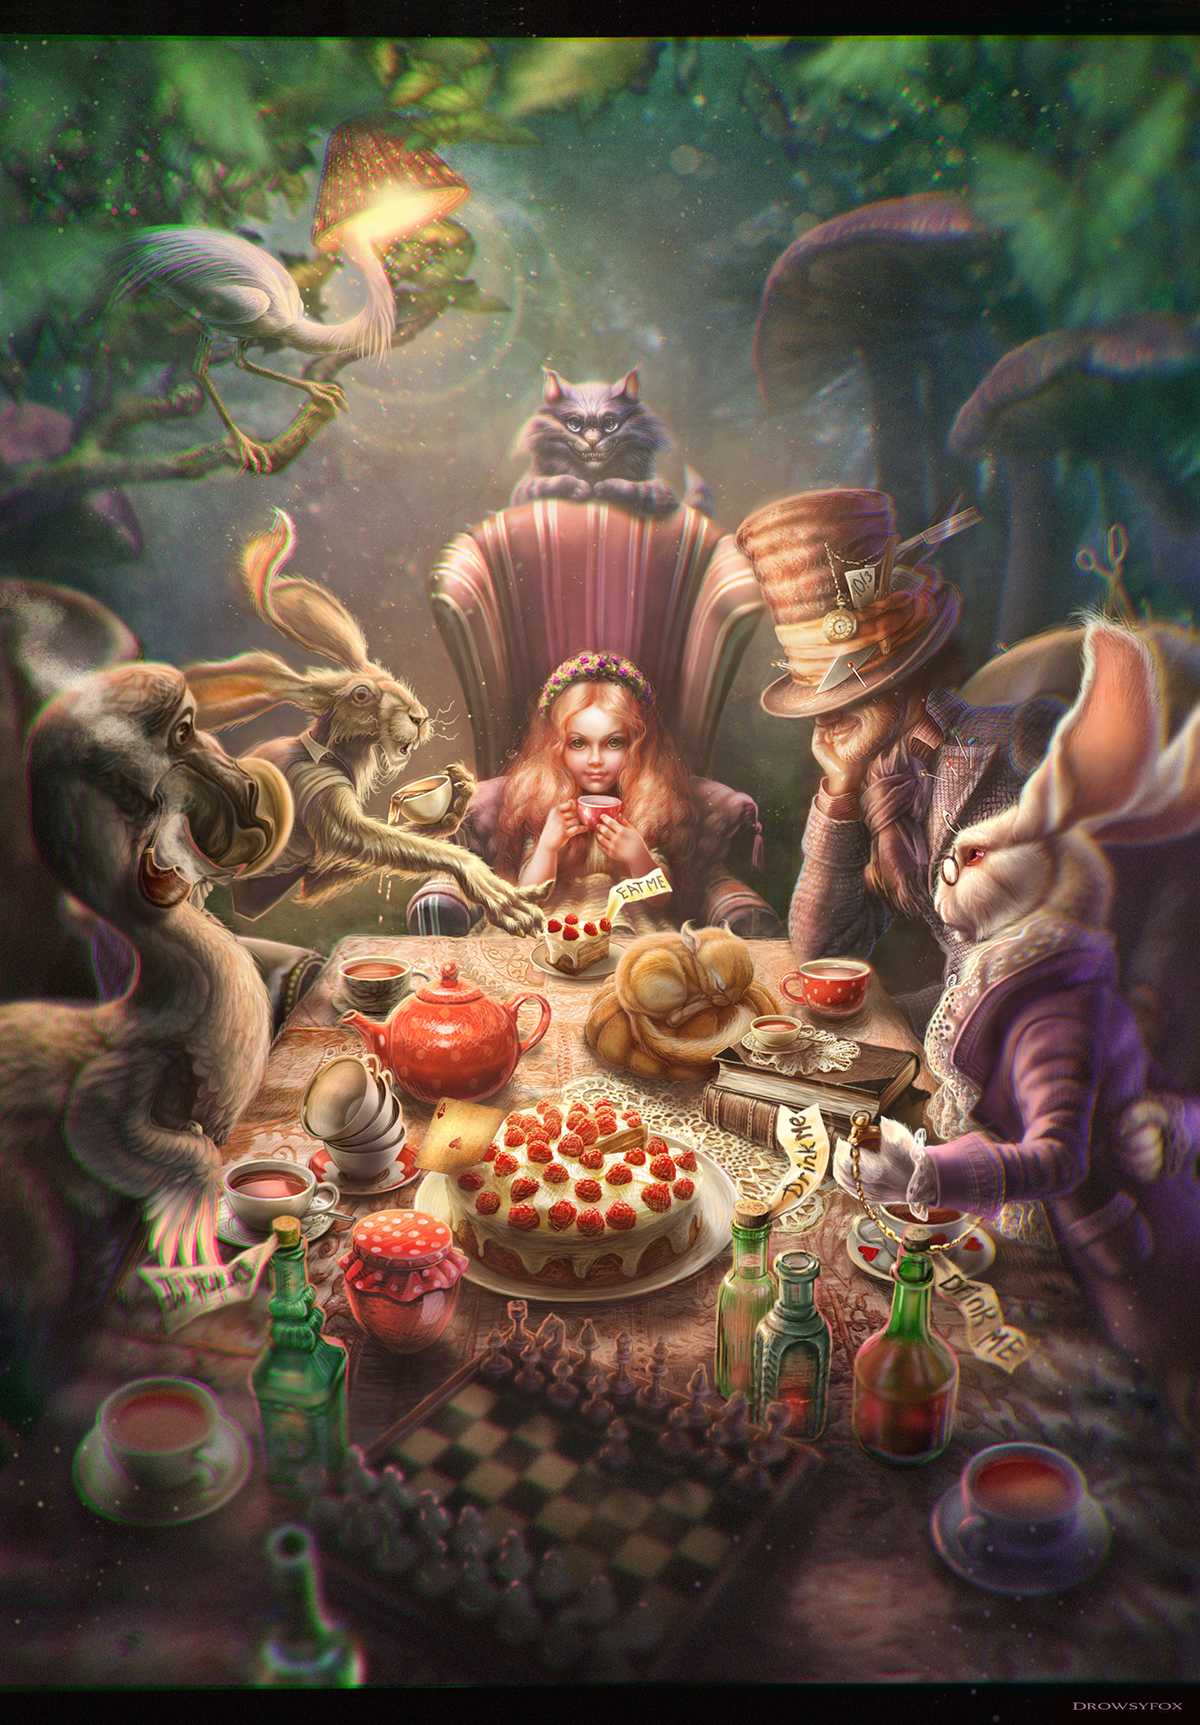 Alice in Wanderland alice mad hatter hatter dodo white rabbit March Hare teaparty cheshire cat dormouse